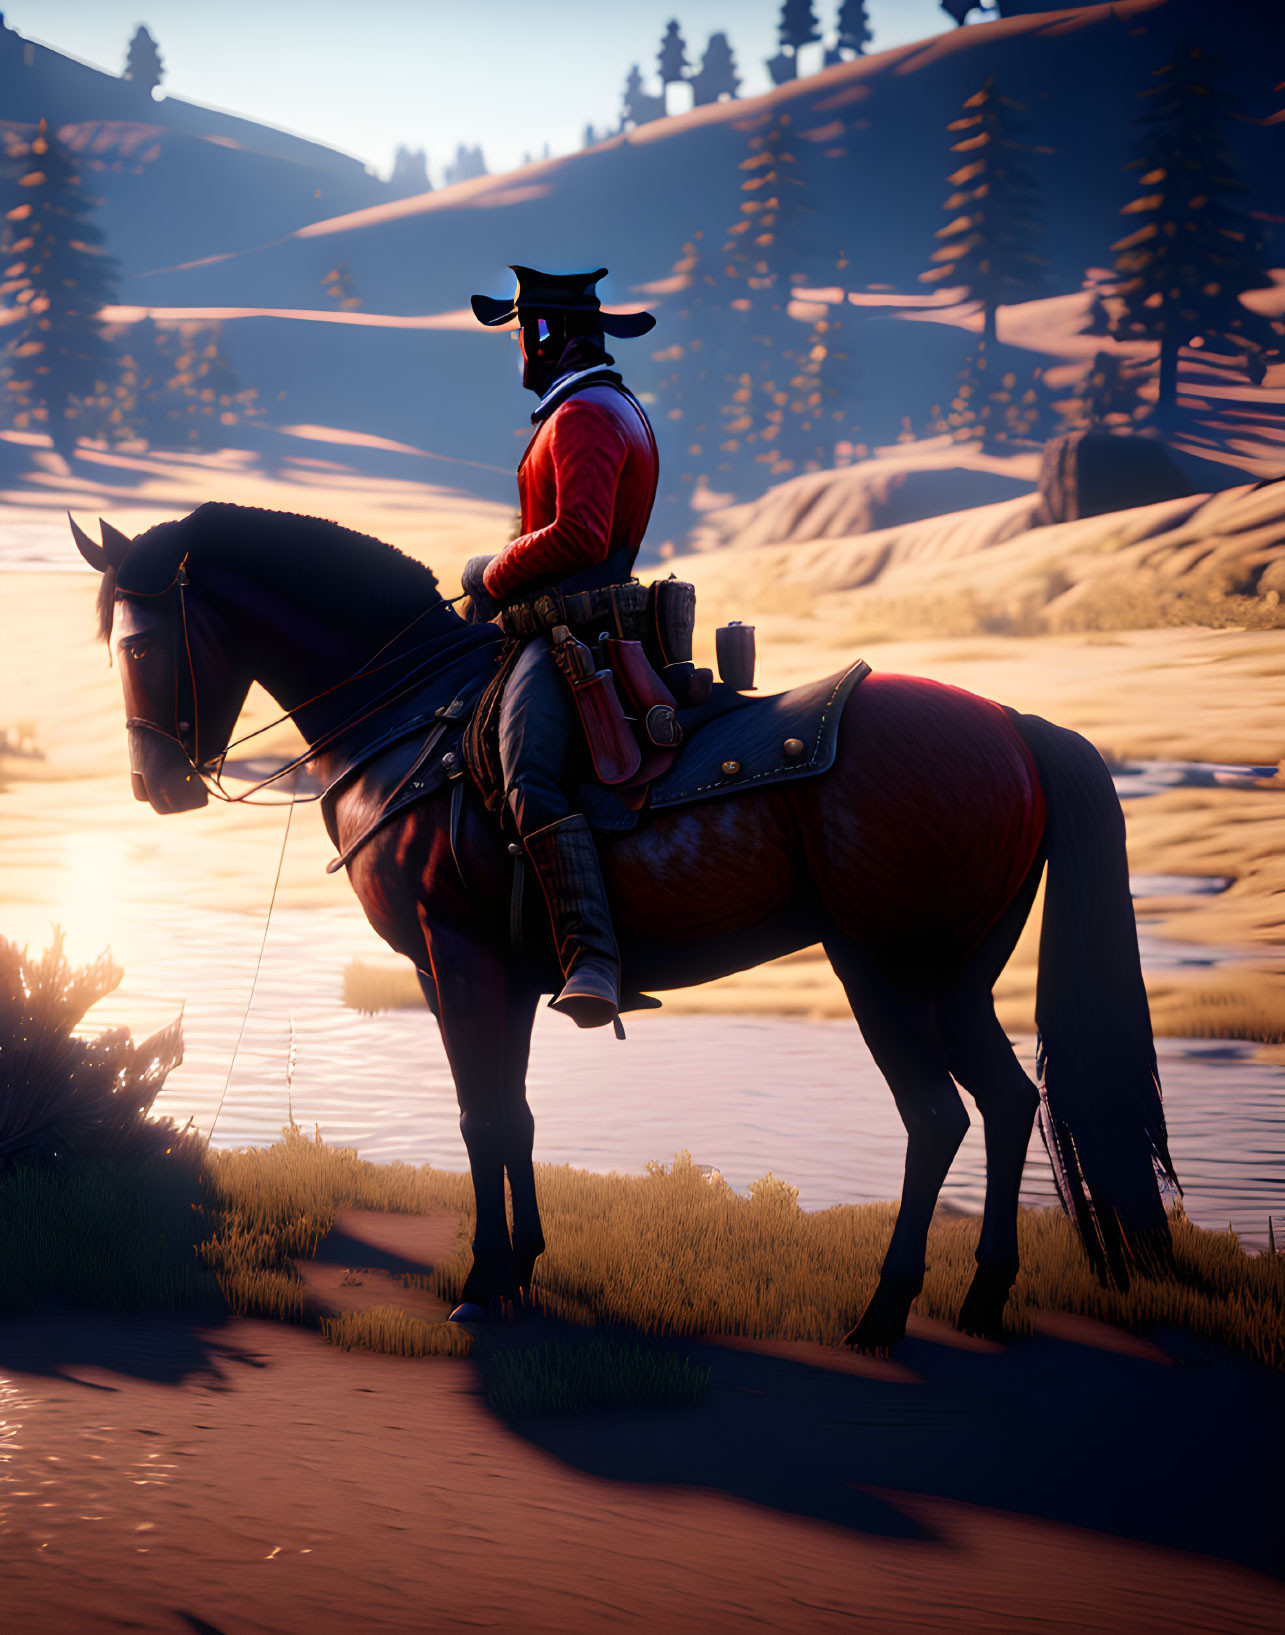 Soldier on Horseback by River at Sunset